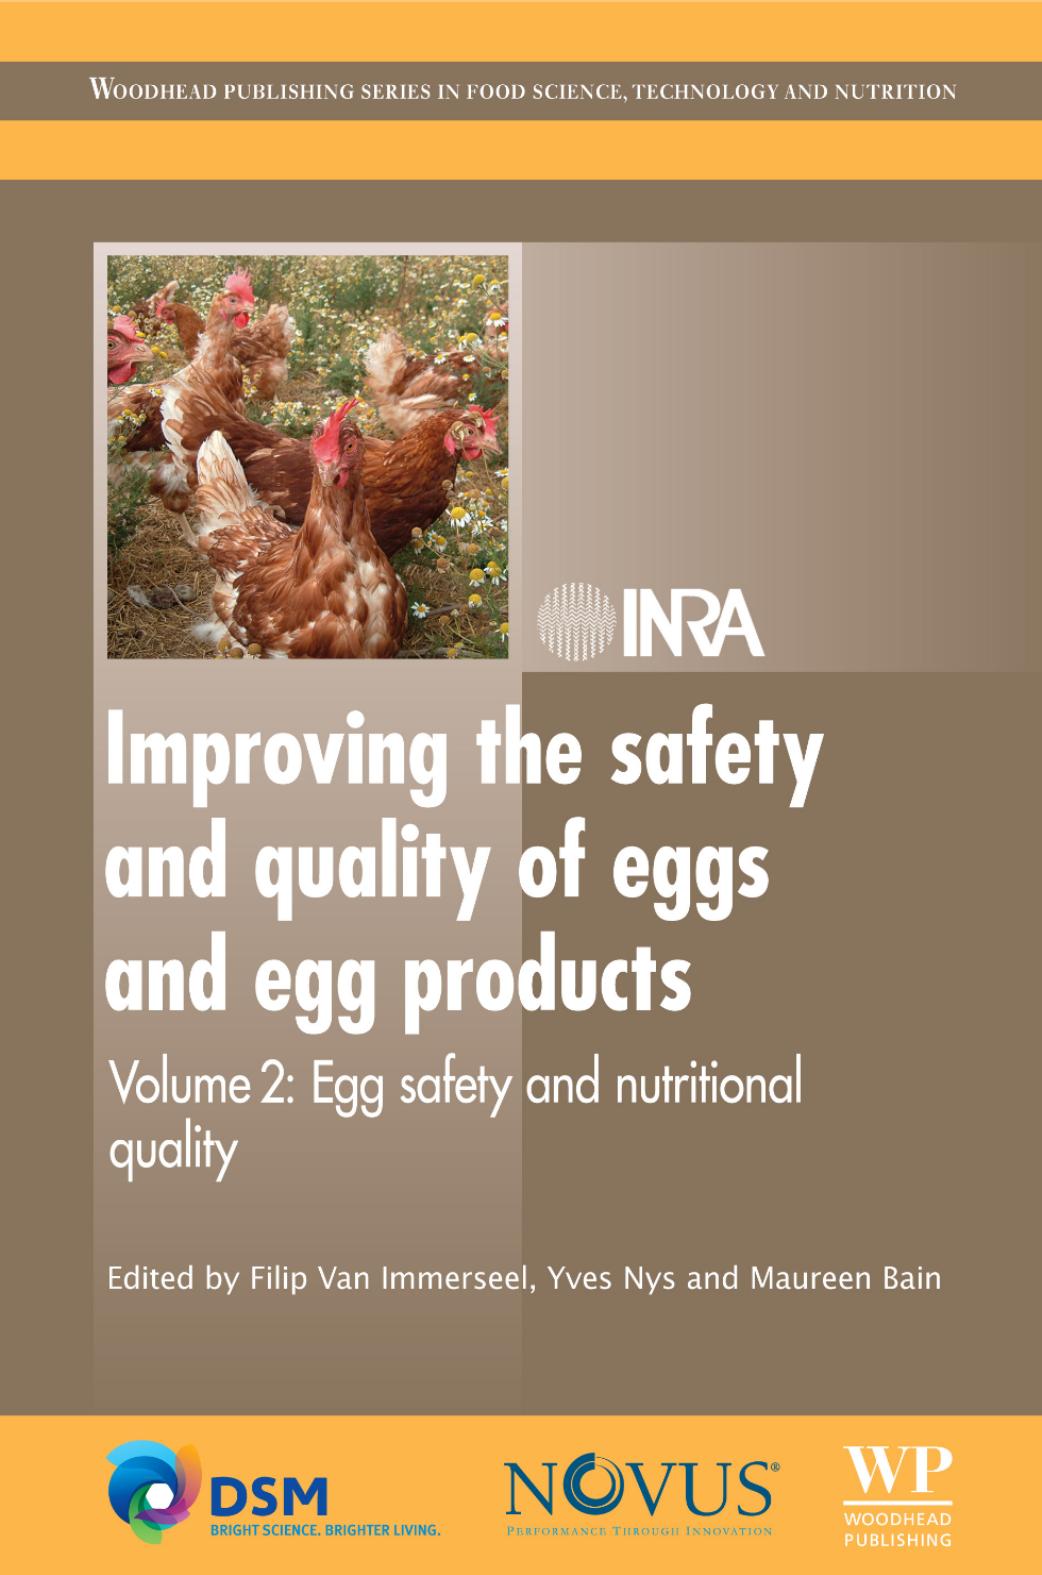 Improving the Safety and Quality of Eggs and Egg Products  Volume 2  Egg safety and nutritional quality (Food Science, Technology and Nutrition)  2011